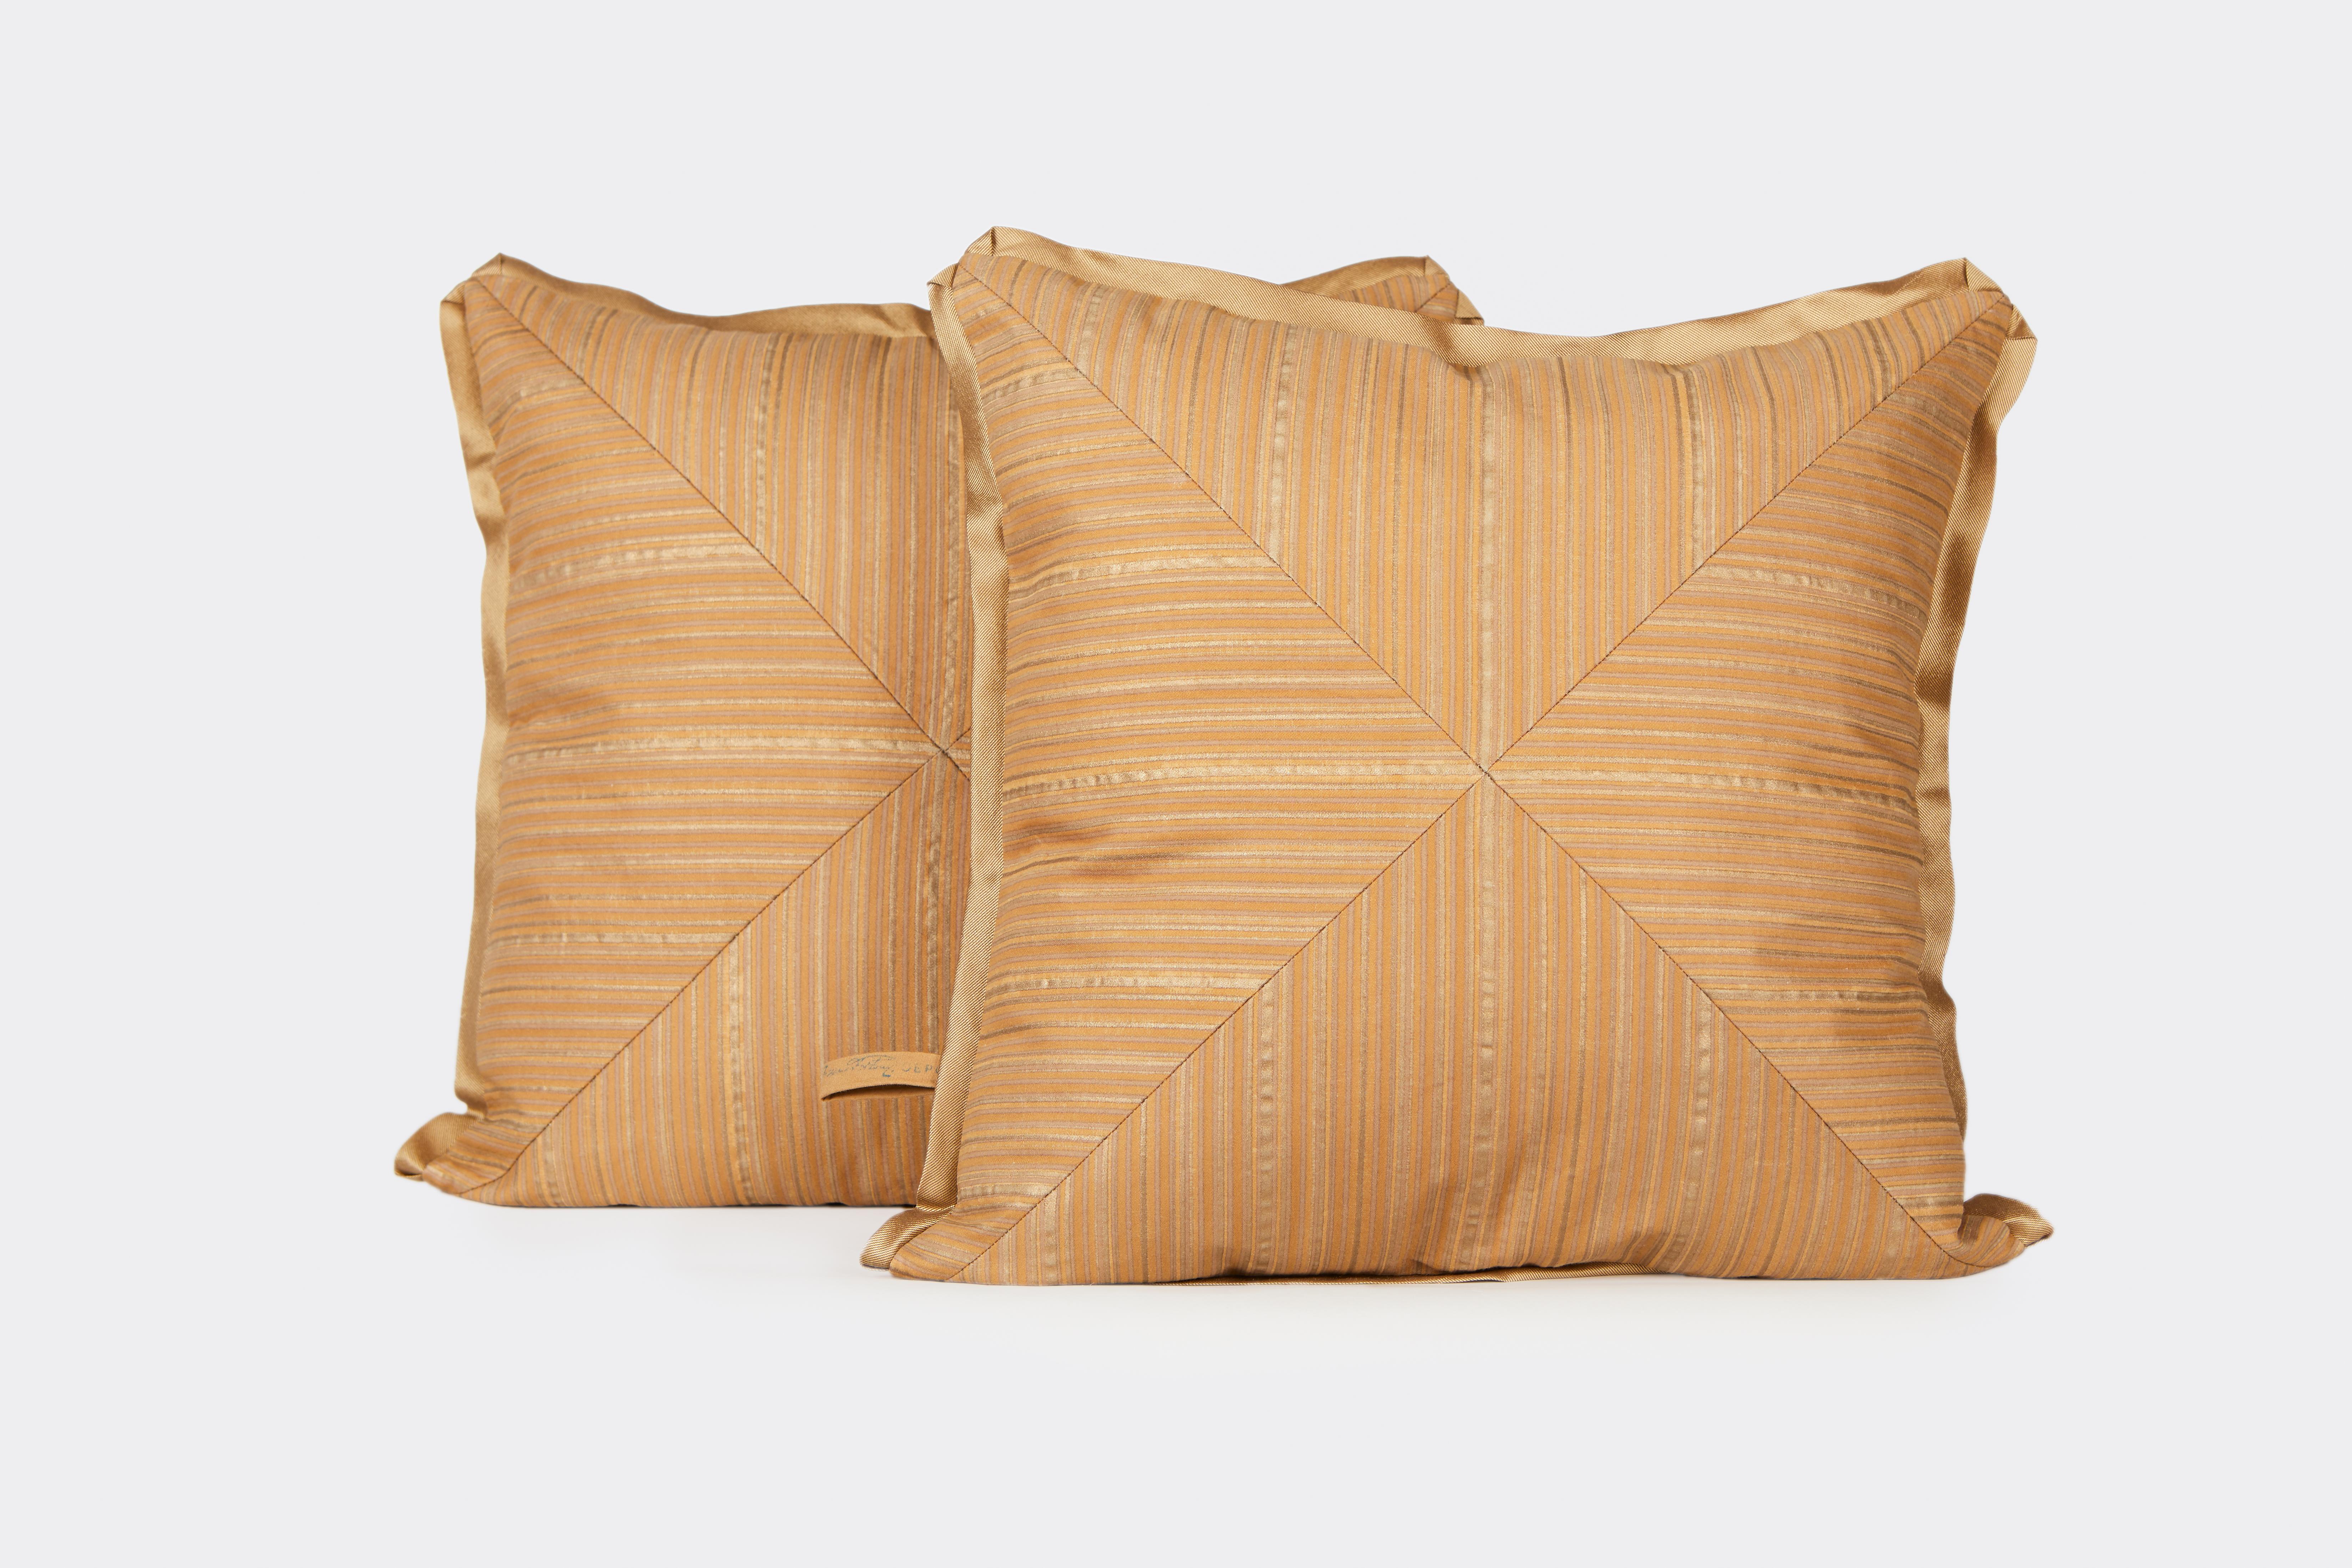 Pair of Mitered Fortuny Fabric Cushions in the Malmaison Pattern by David Duncan In Excellent Condition For Sale In New York, NY